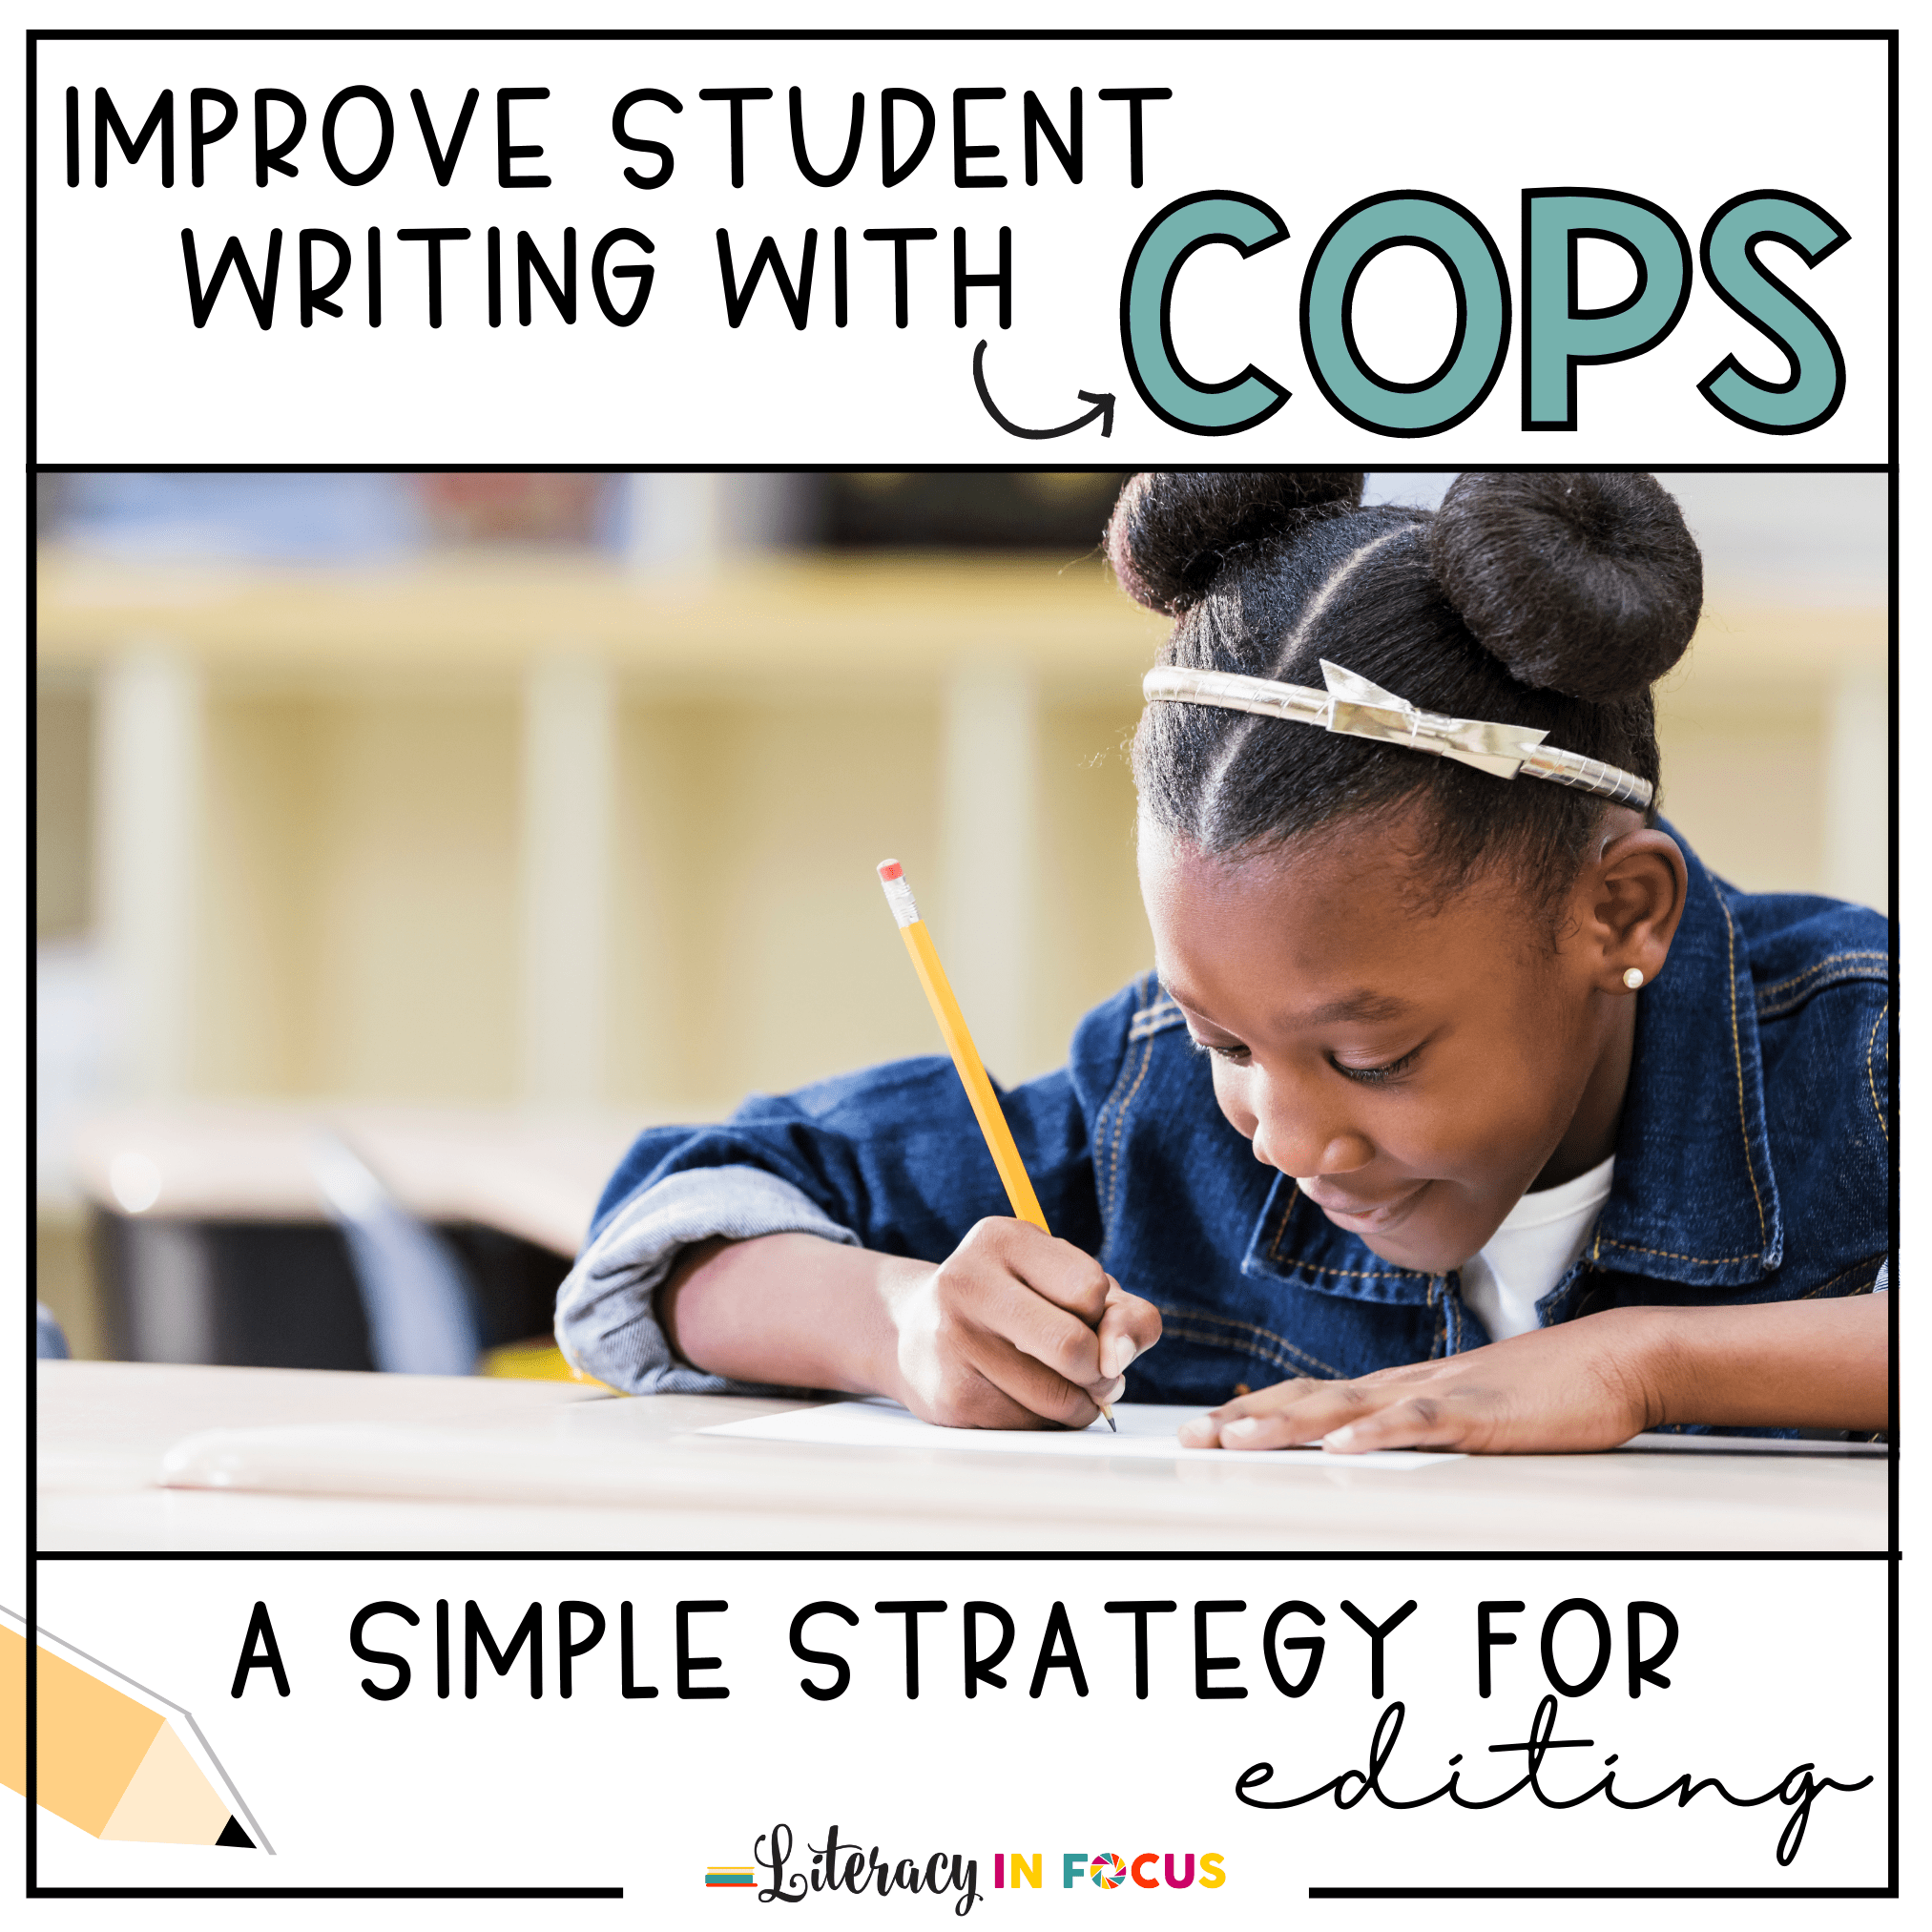 COPS Editing Strategy for Students